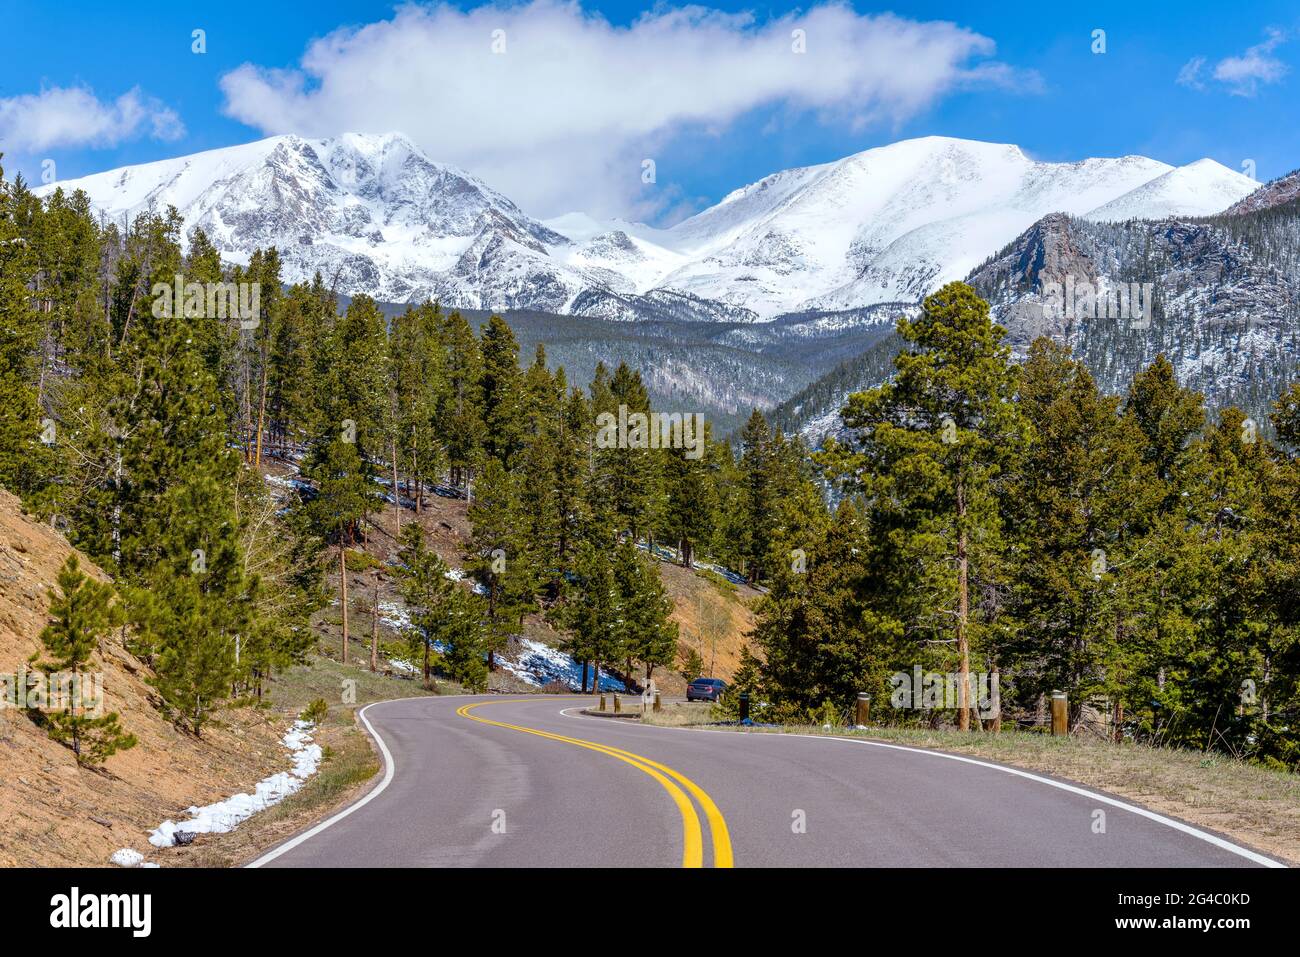 Spring Mountain Road - Spring view of winding Fall River Road, with snow-capped Mummy Range towering in background, Rocky Mountain National Park. Stock Photo